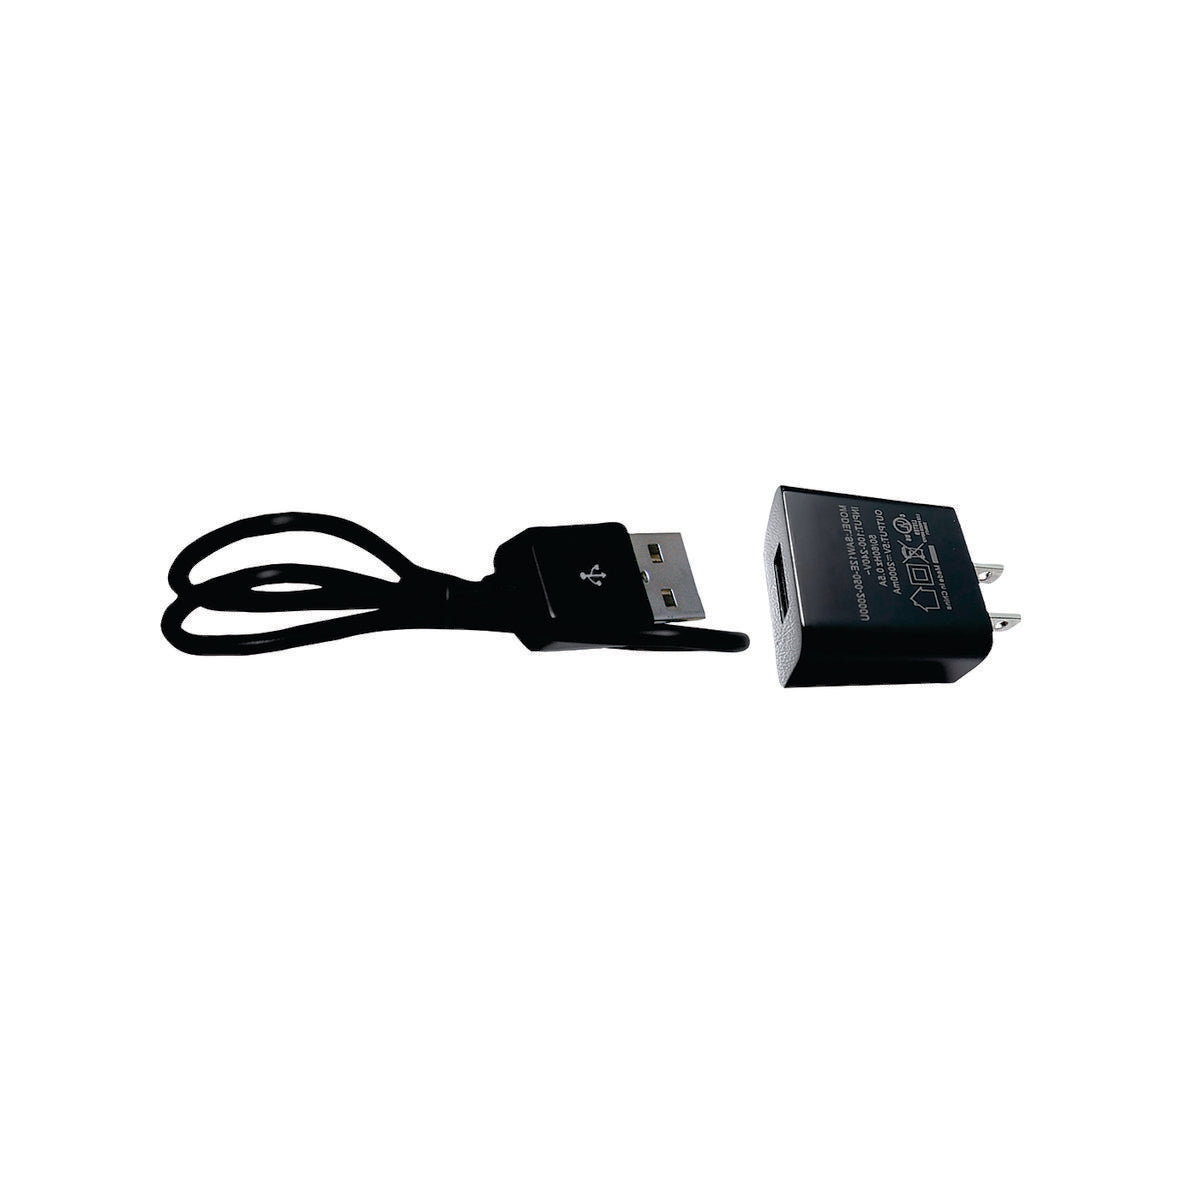 ActionHeat 5V Wall Charger and Power Cord Kit - Heated